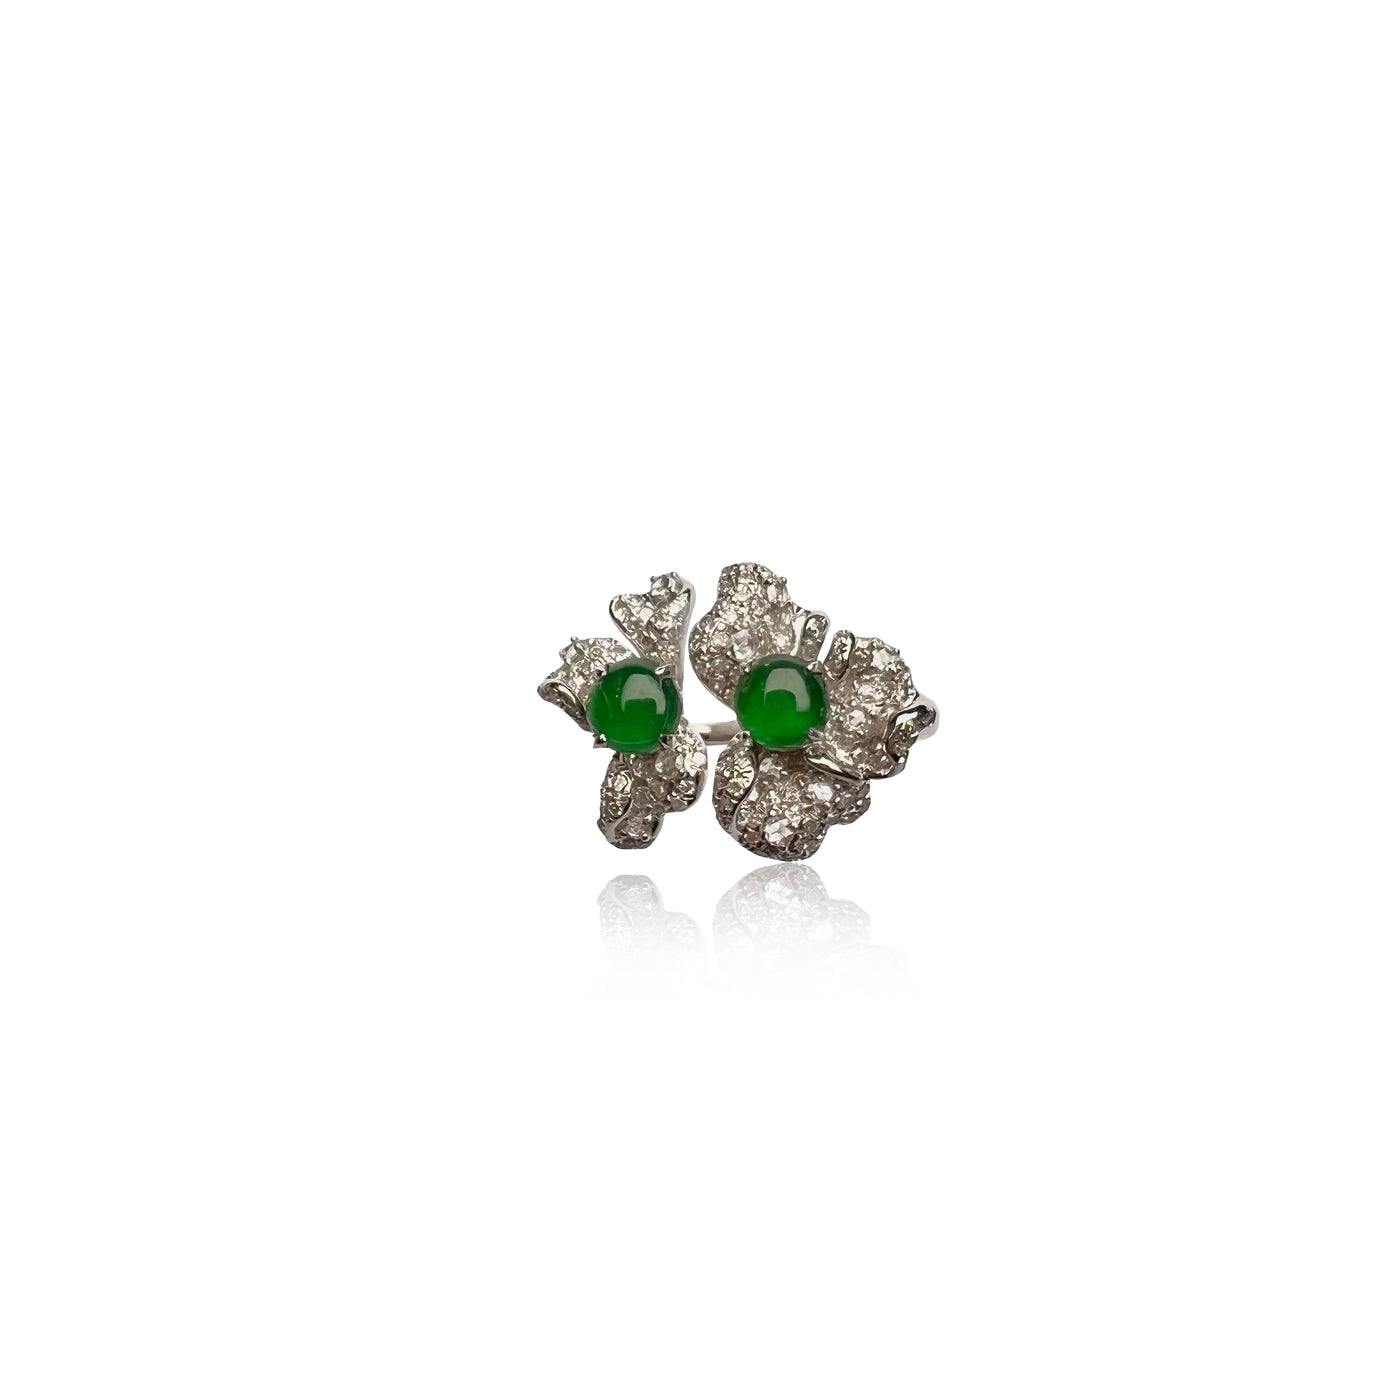 Jadeite cabochons ring in 18k white gold and diamonds